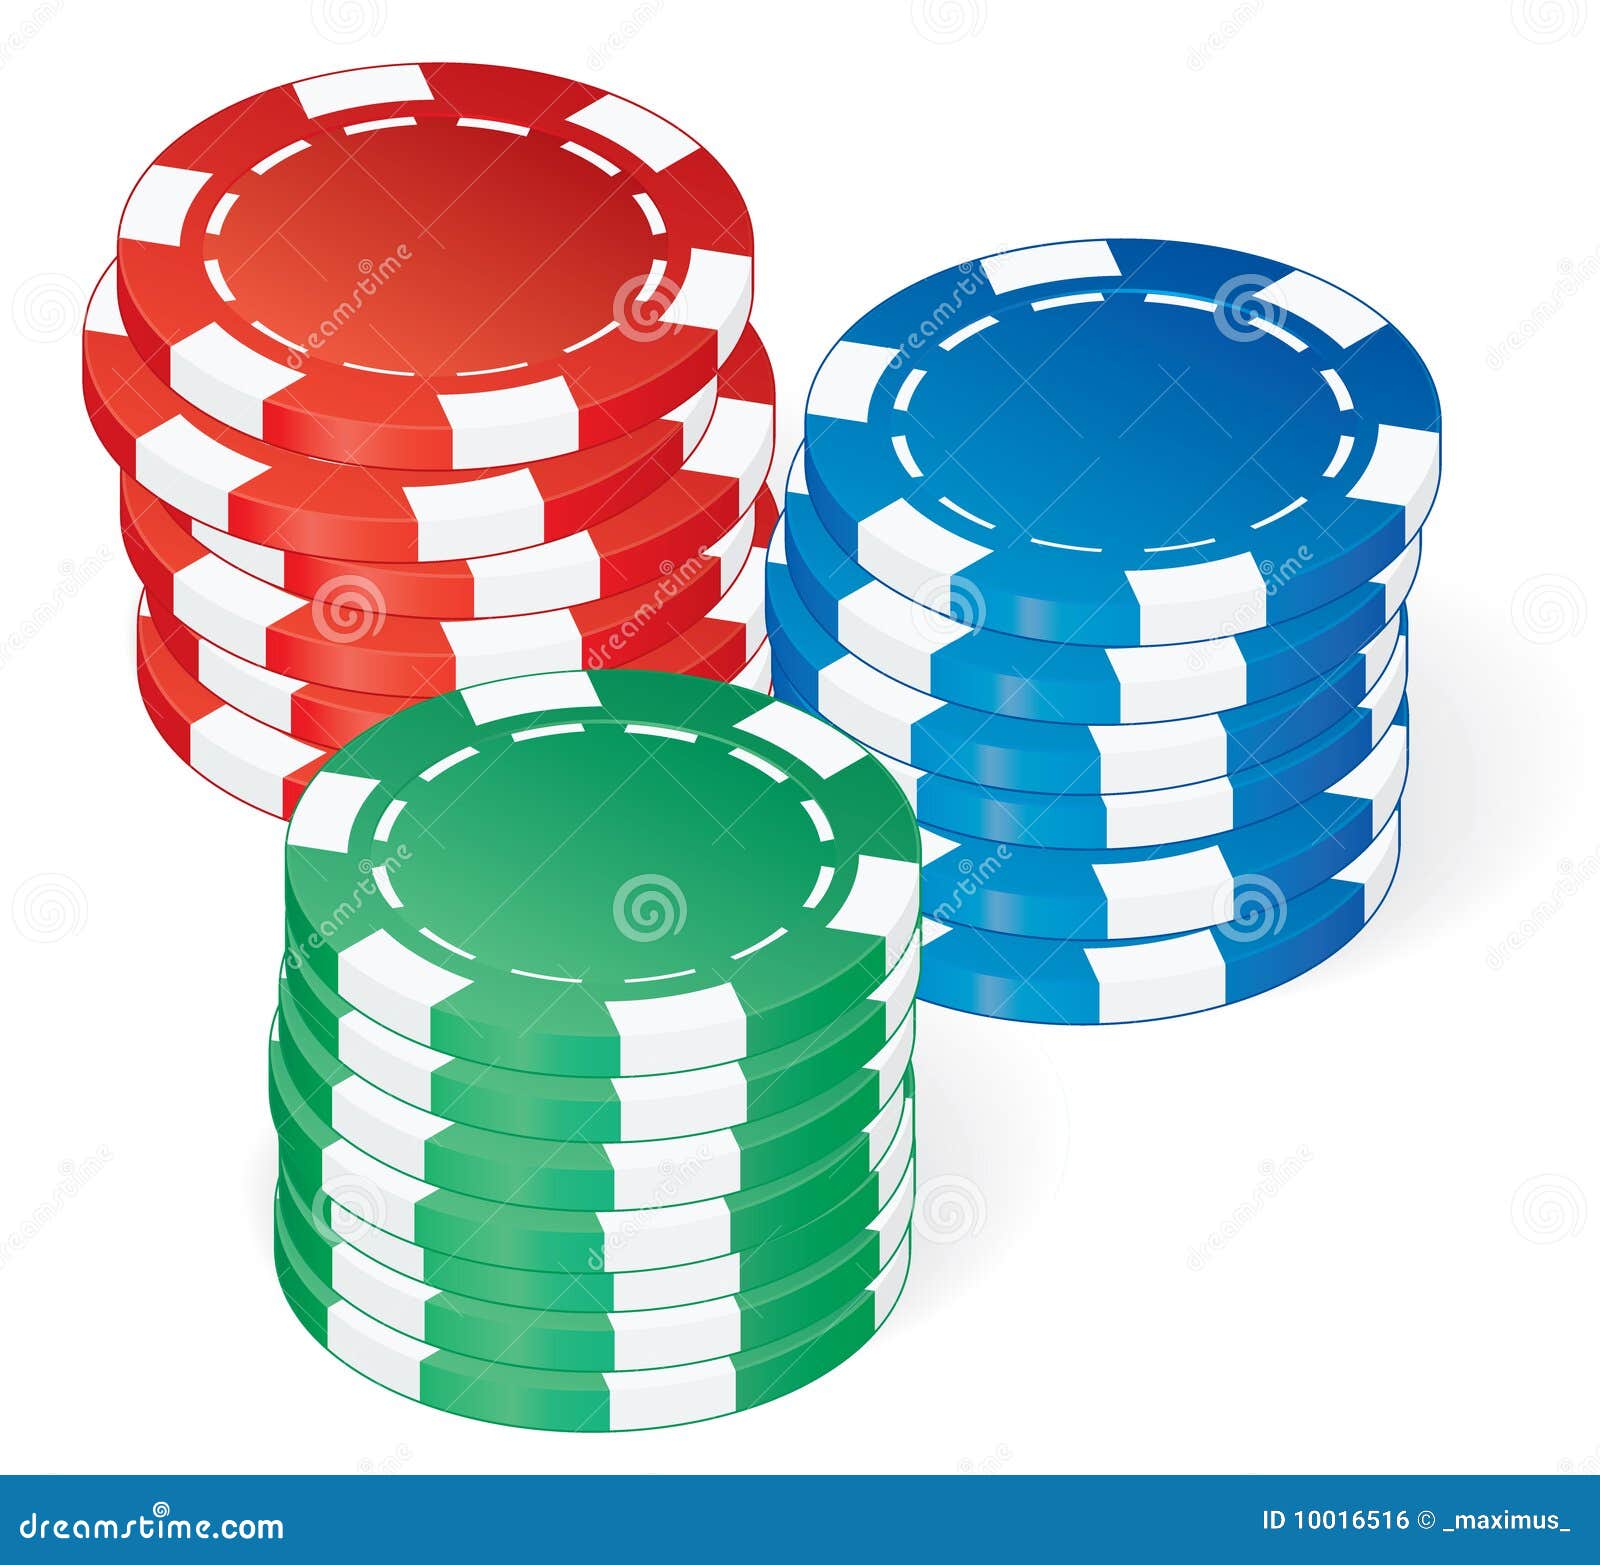 Poker Chips Vector Royalty Free Stock Image - Image: 10016516